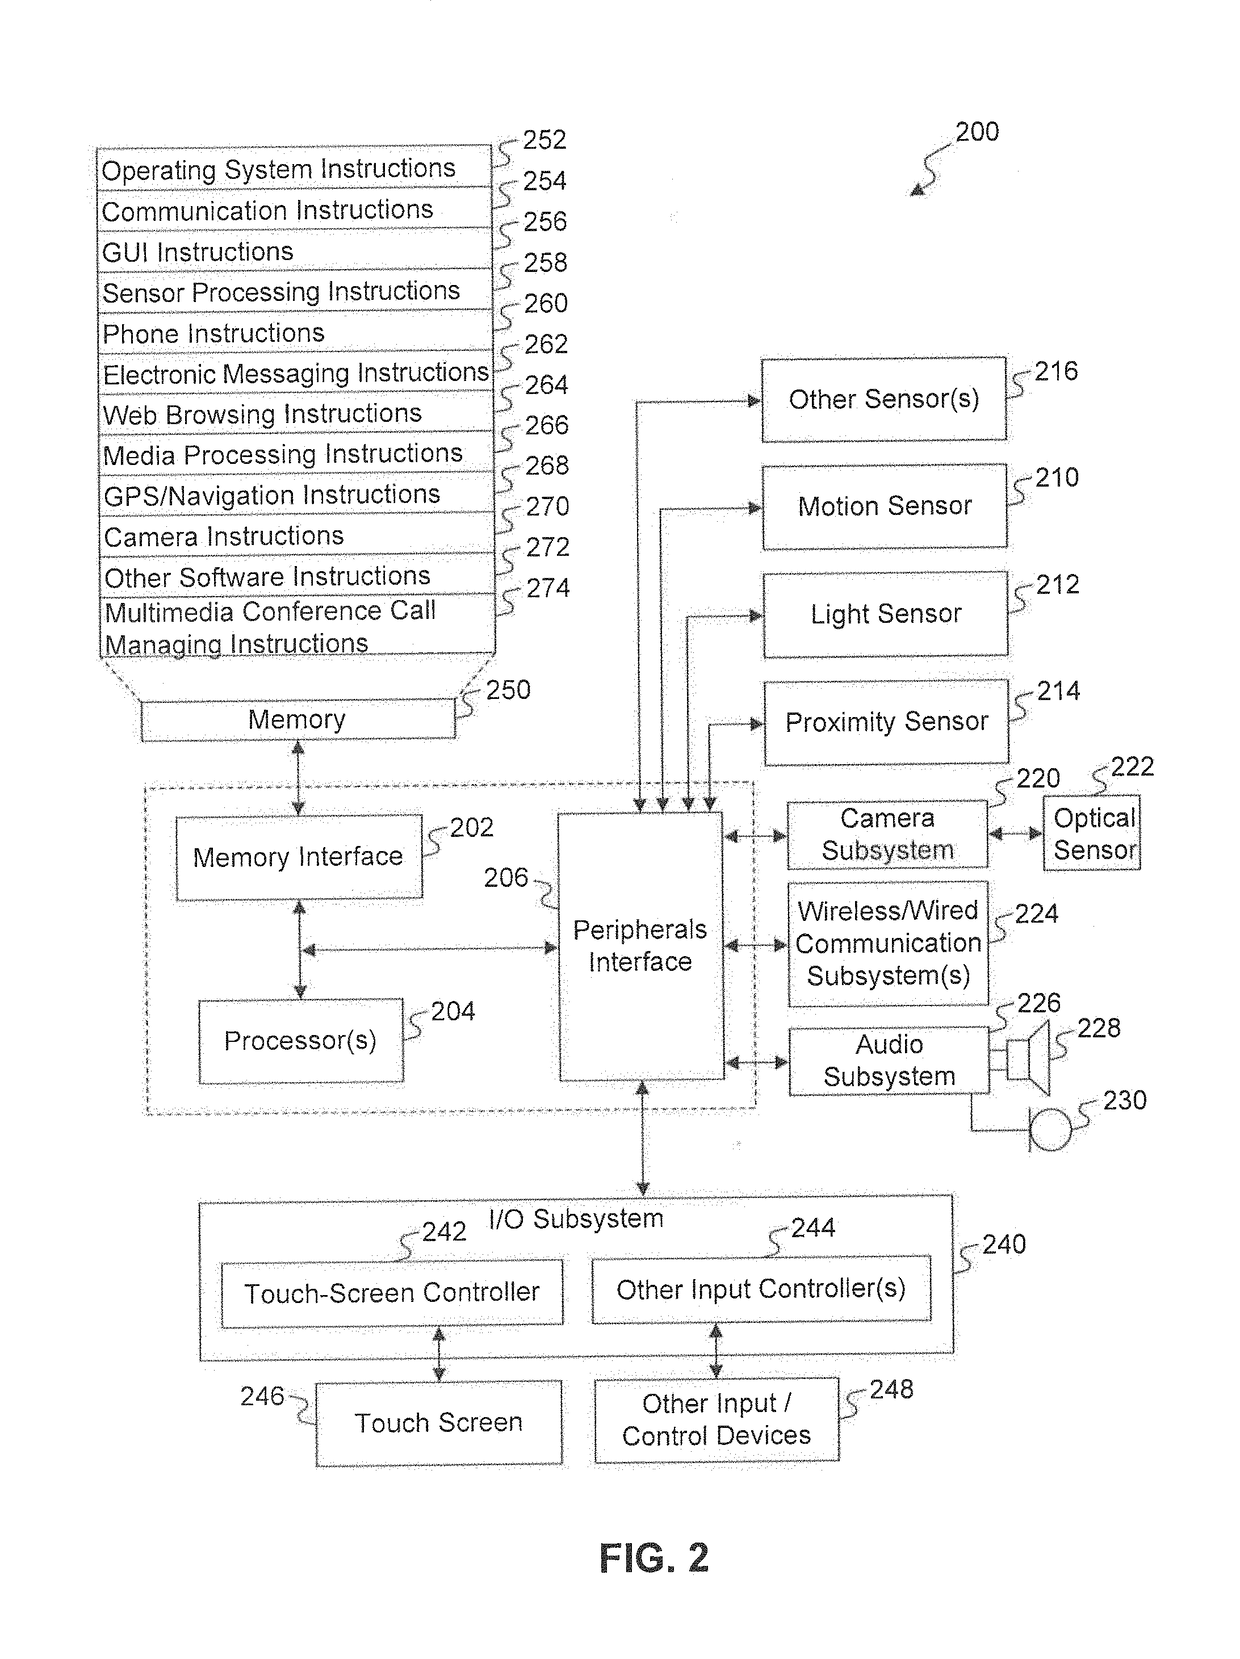 Systems and Methods for Vehicle Ridesharing Management